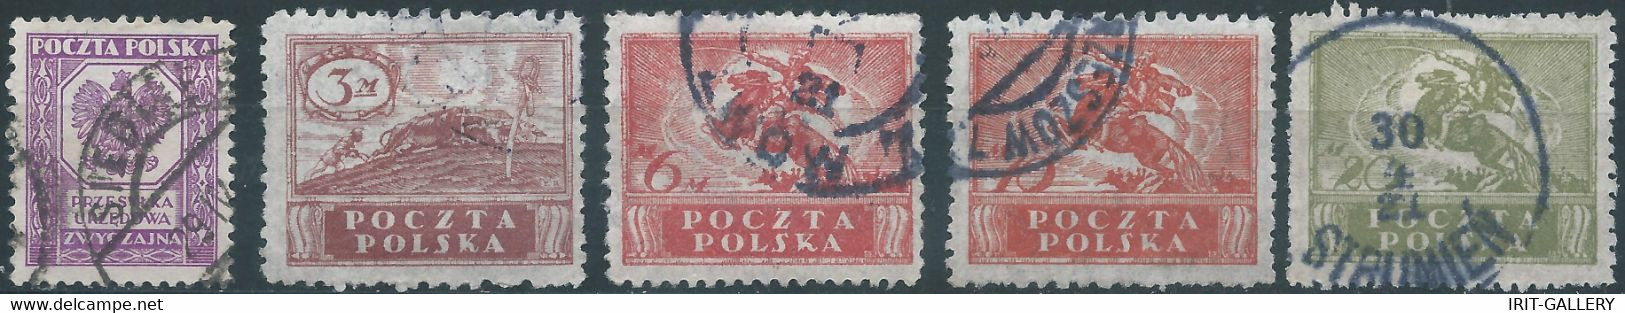 POLONIA-POLAND-POLSKA,1919 South And North Poland Issues,Obliterated - Gebraucht